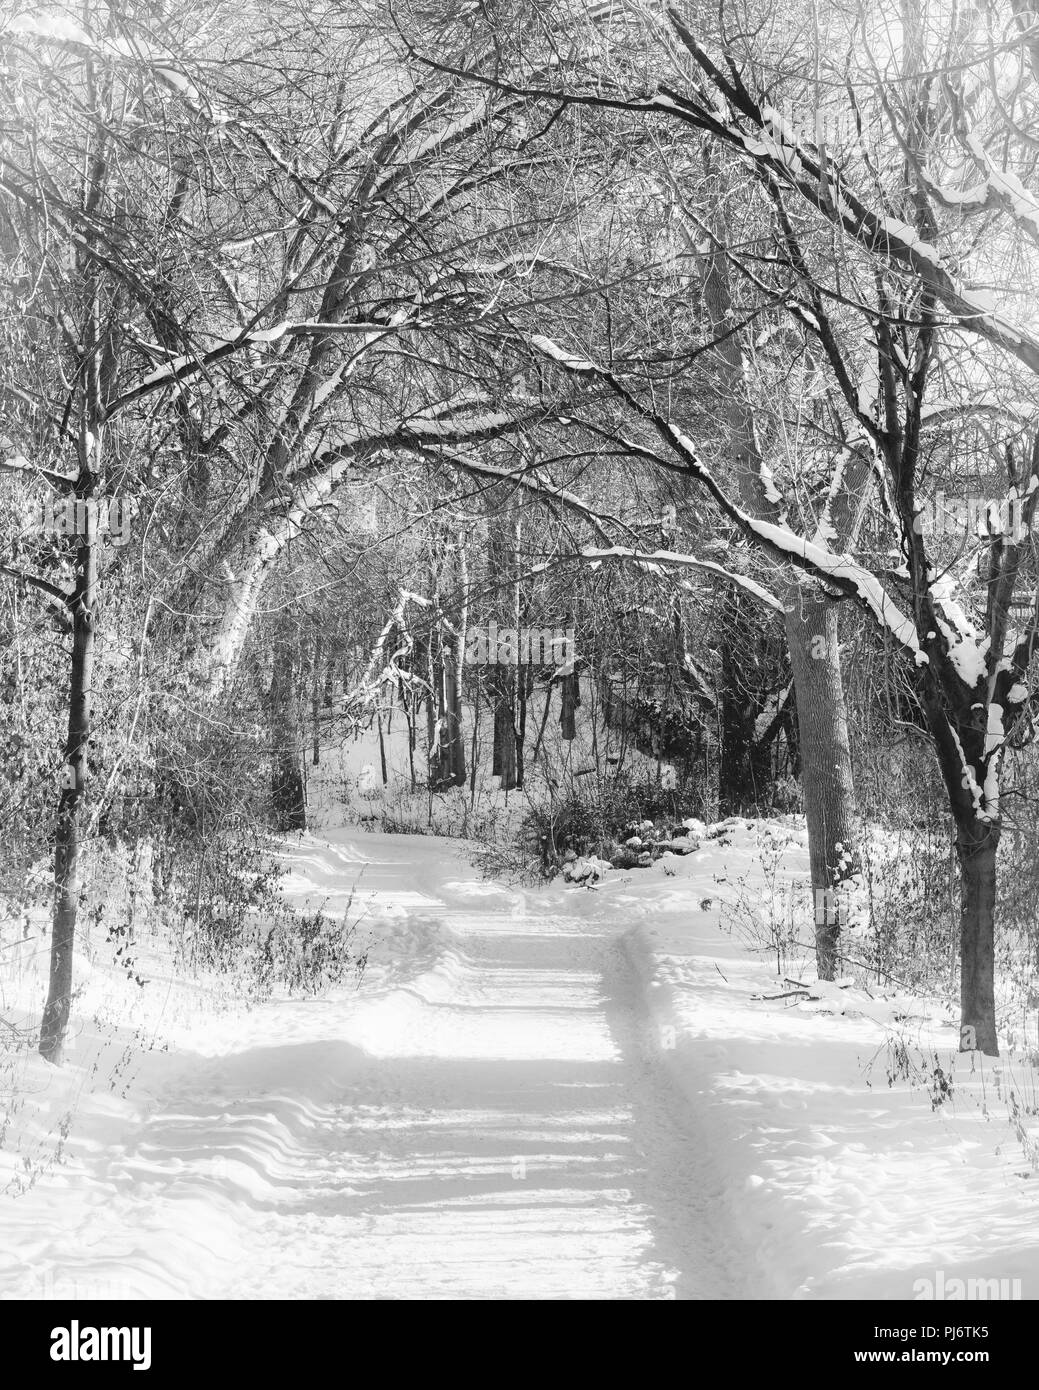 Snowy Path Winding Through A Forest In The Winter In Black And White Stock Photo